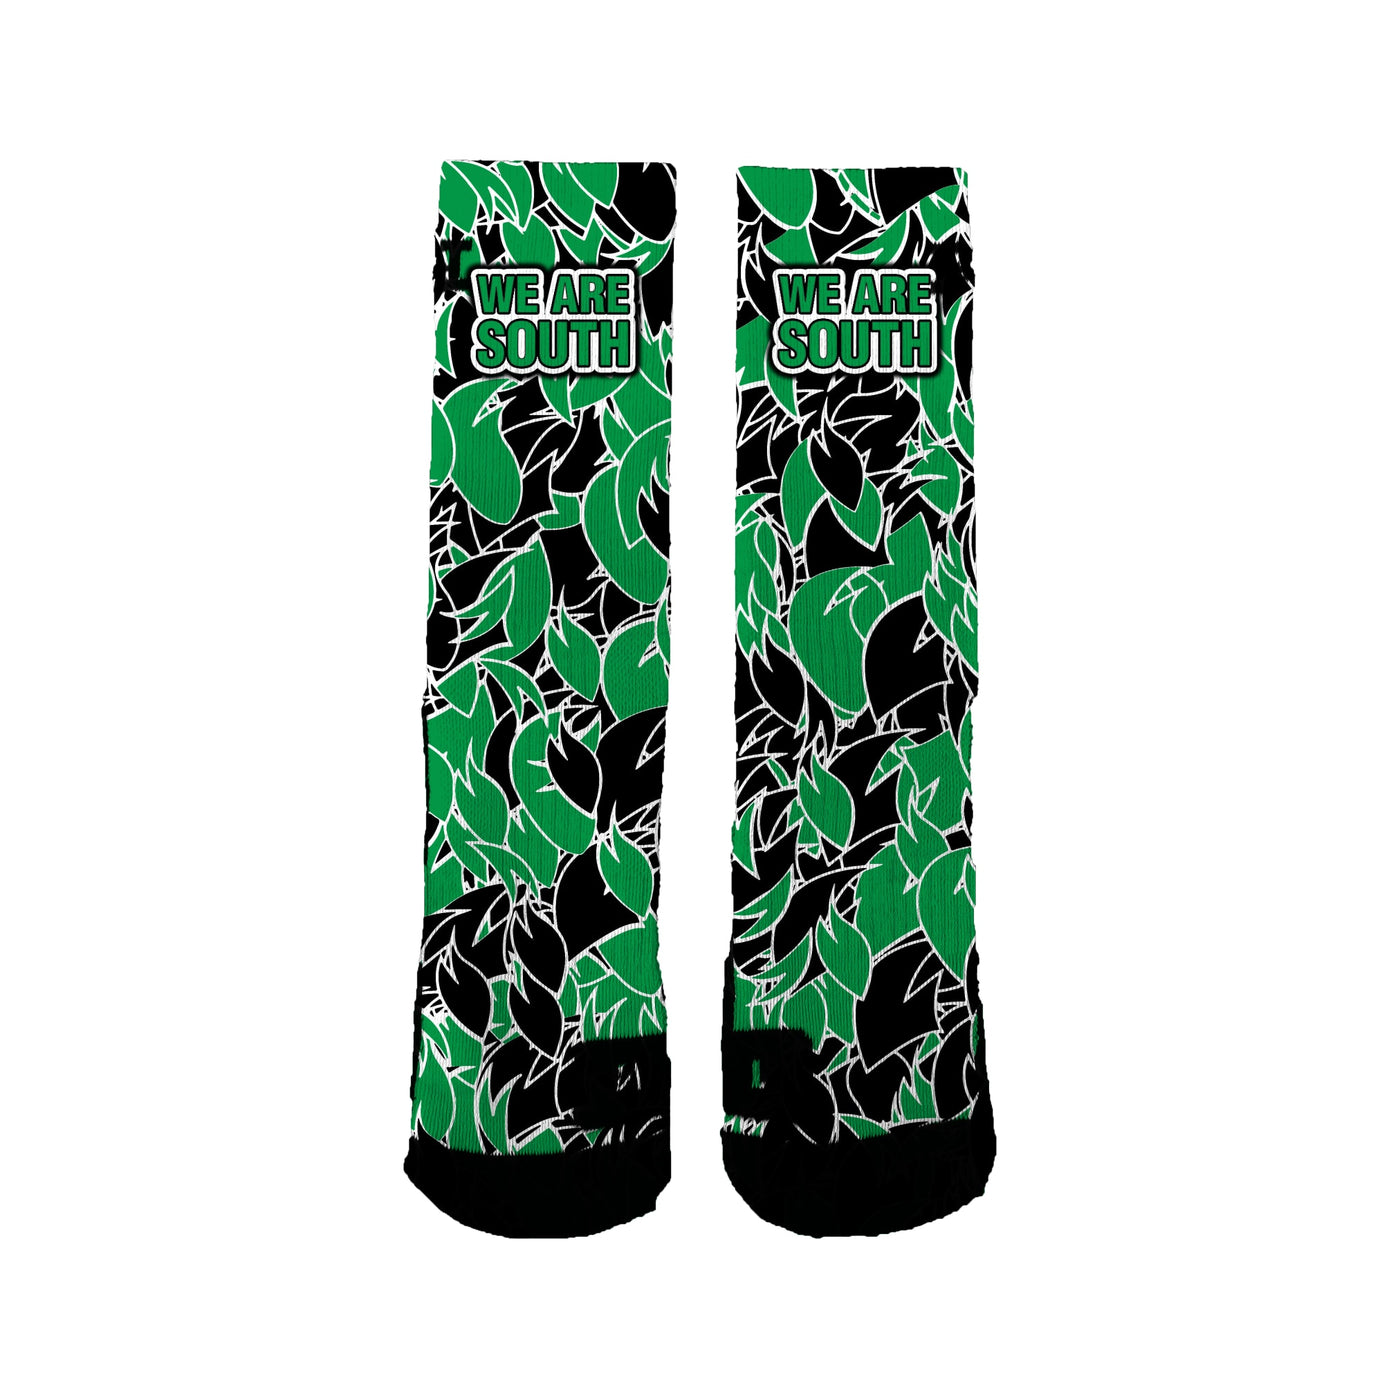 South Middle School China Socks